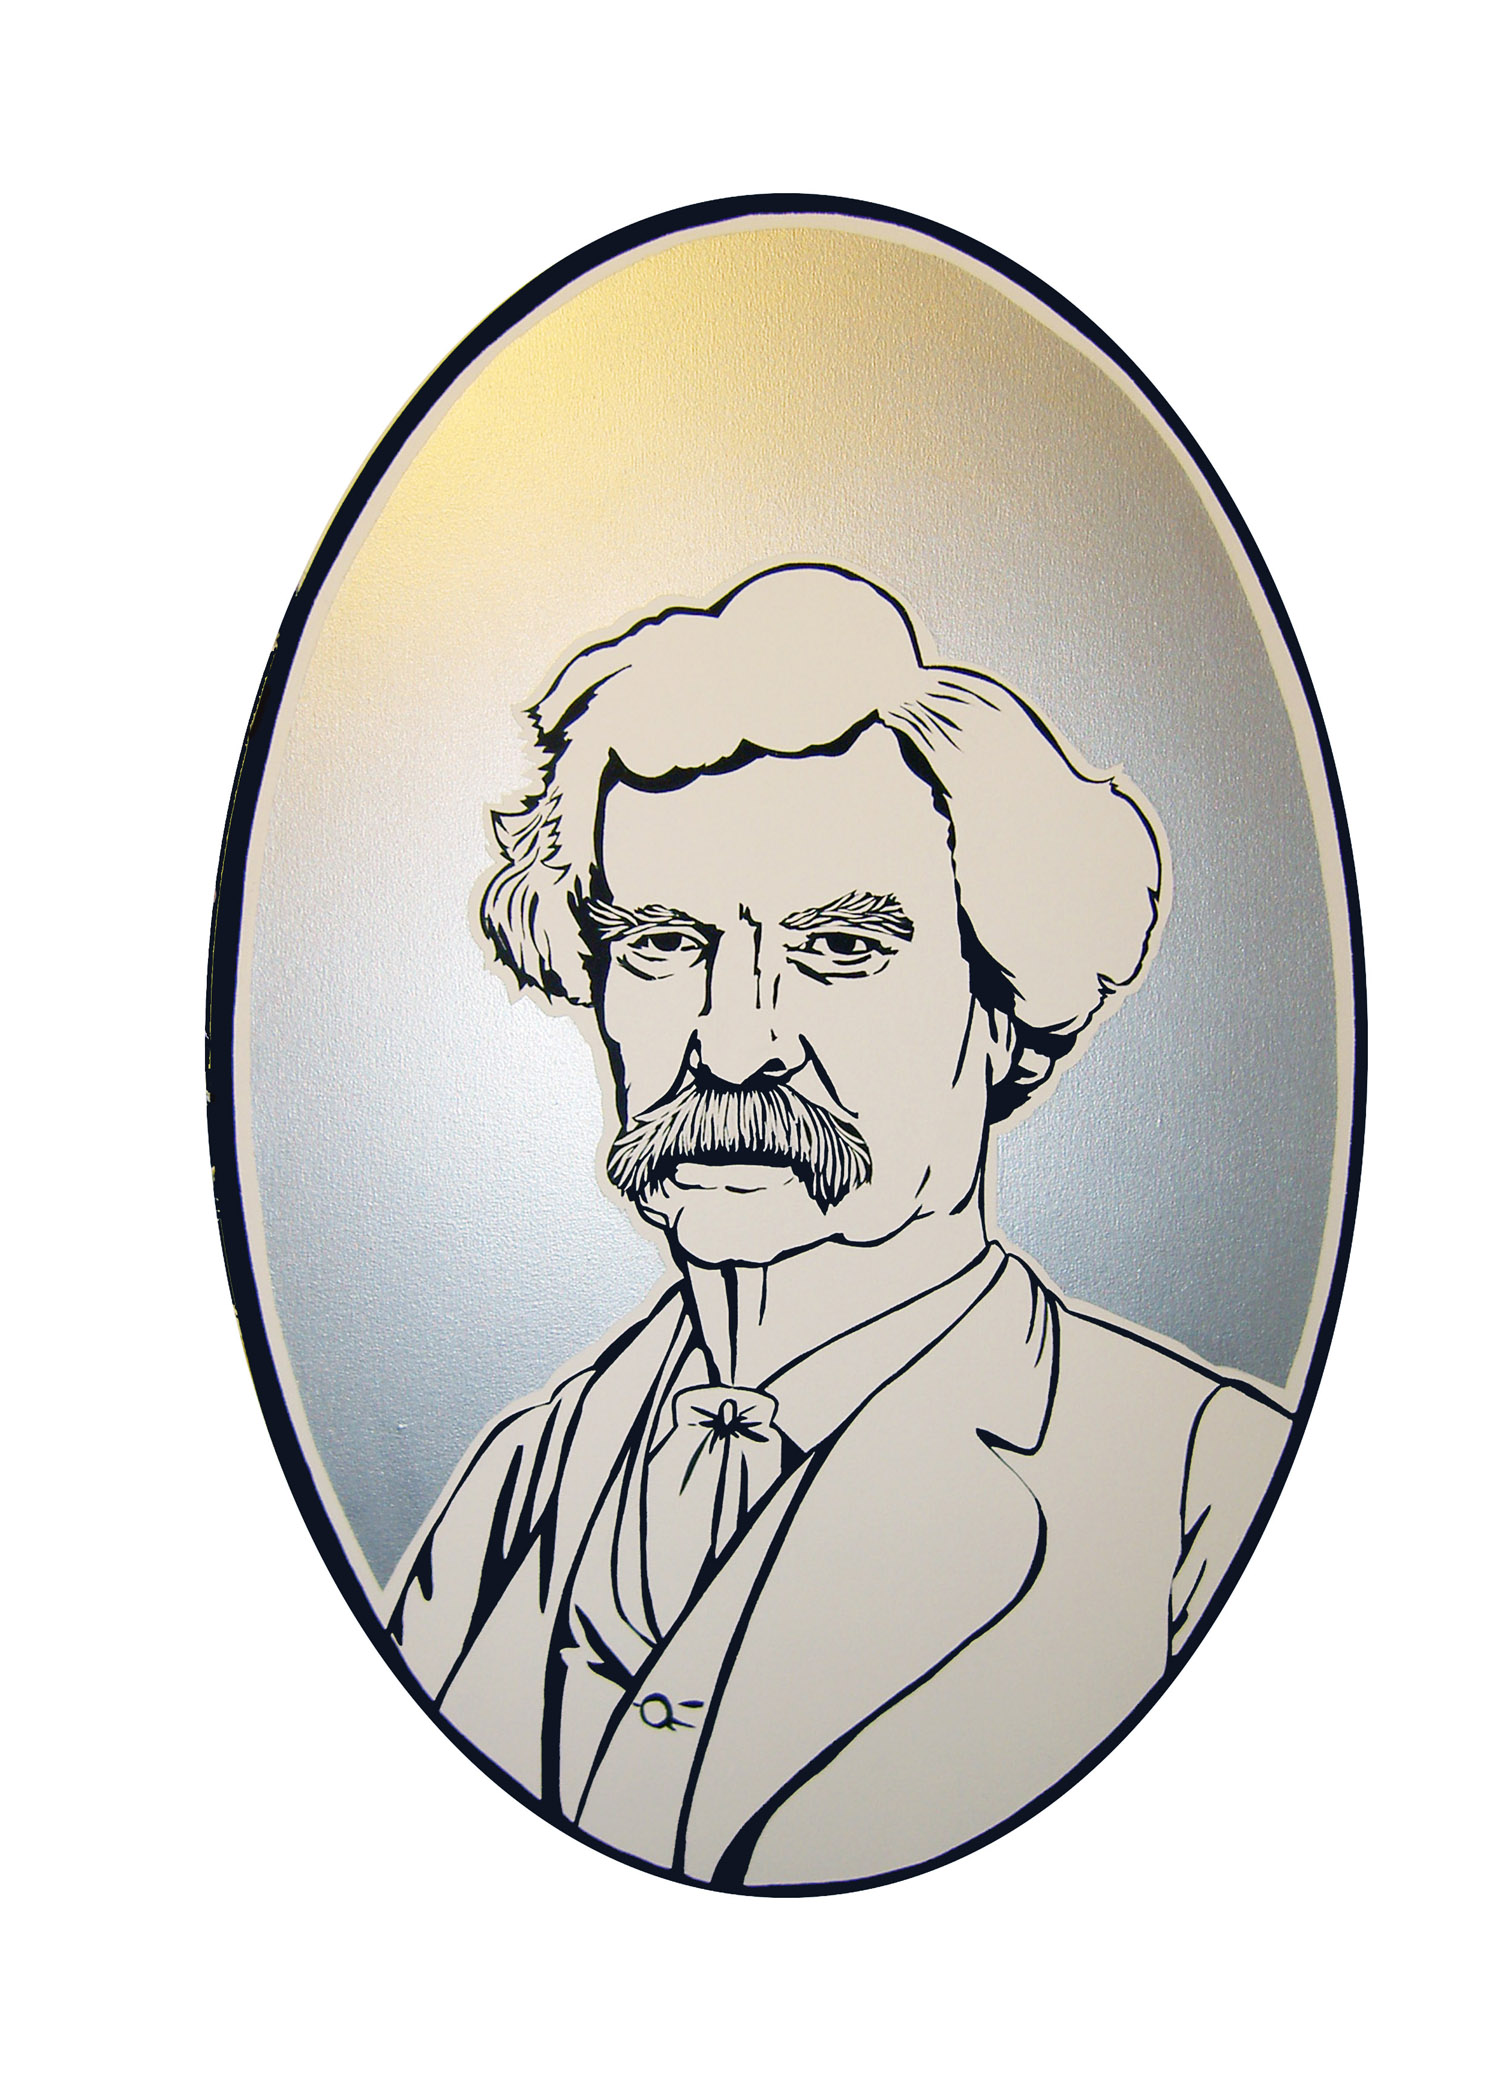  "Twain", house and metallic paint on canvas - Percent for Art PS169 2009 46"x30" 